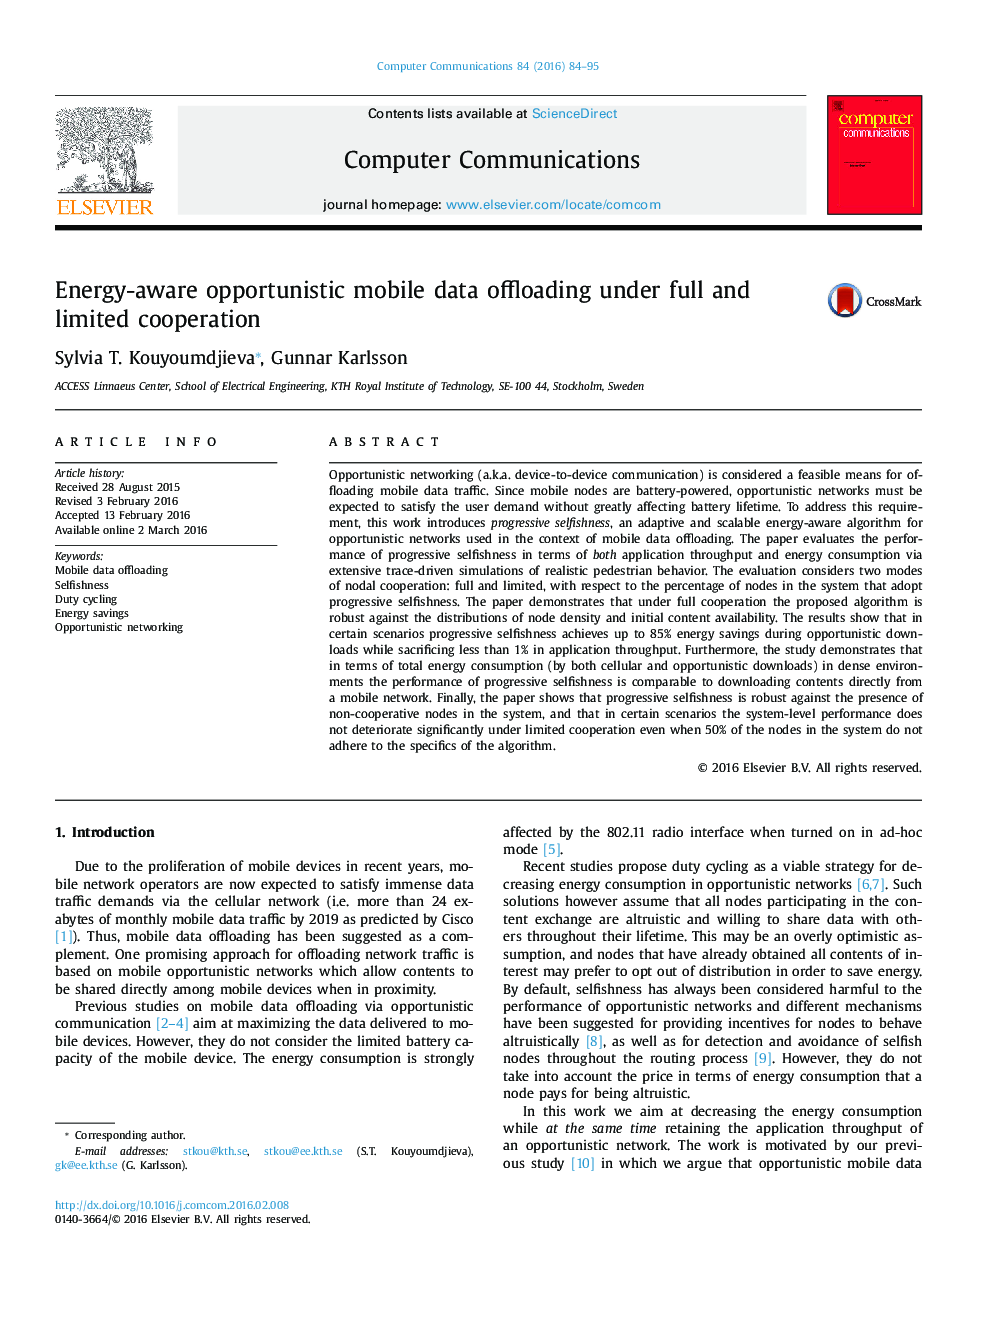 Energy-aware opportunistic mobile data offloading under full and limited cooperation